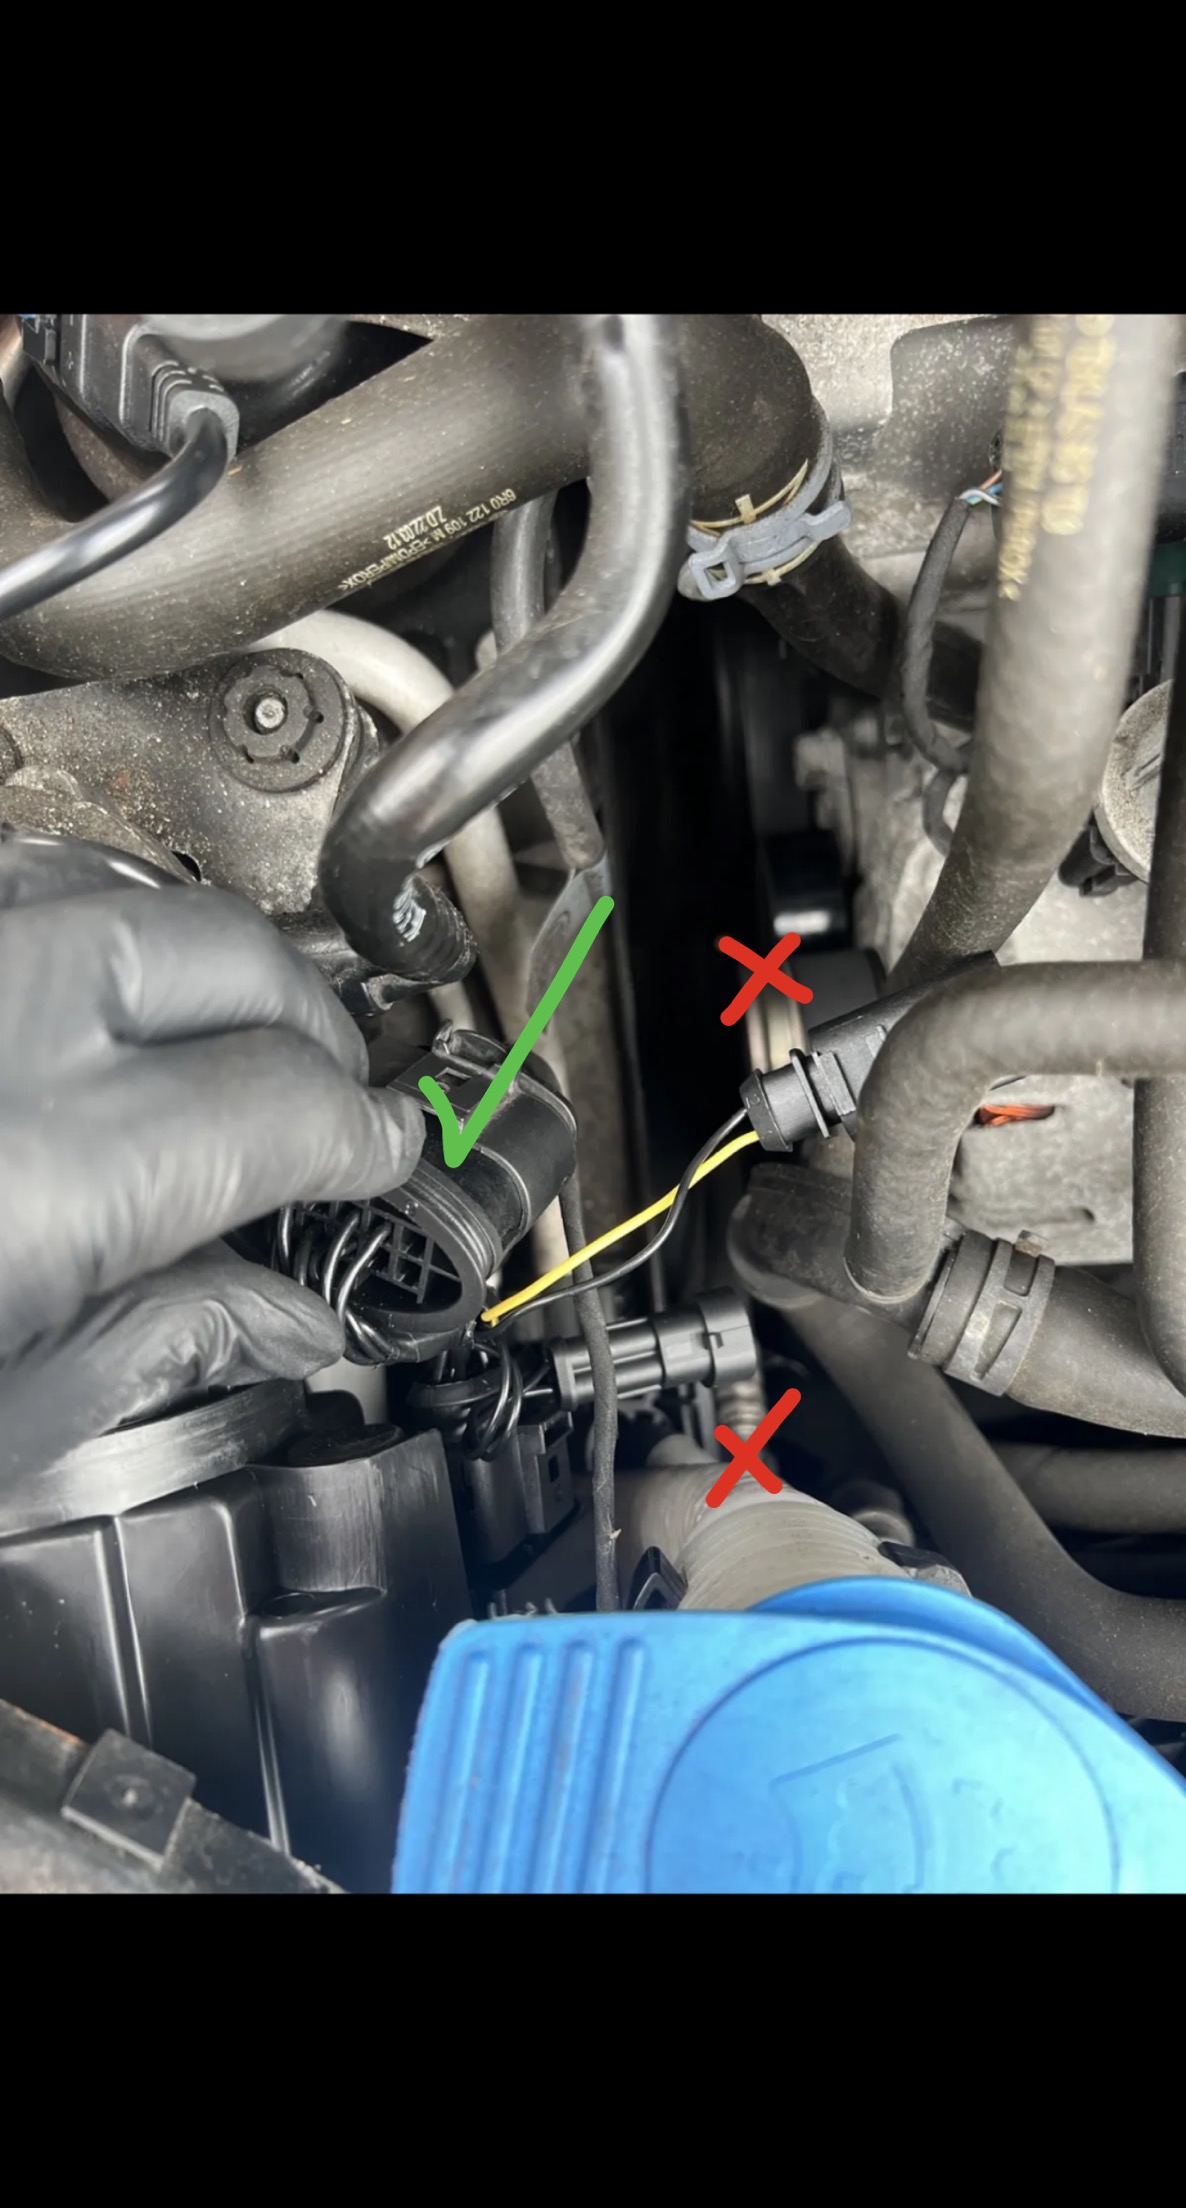 Headlight connections